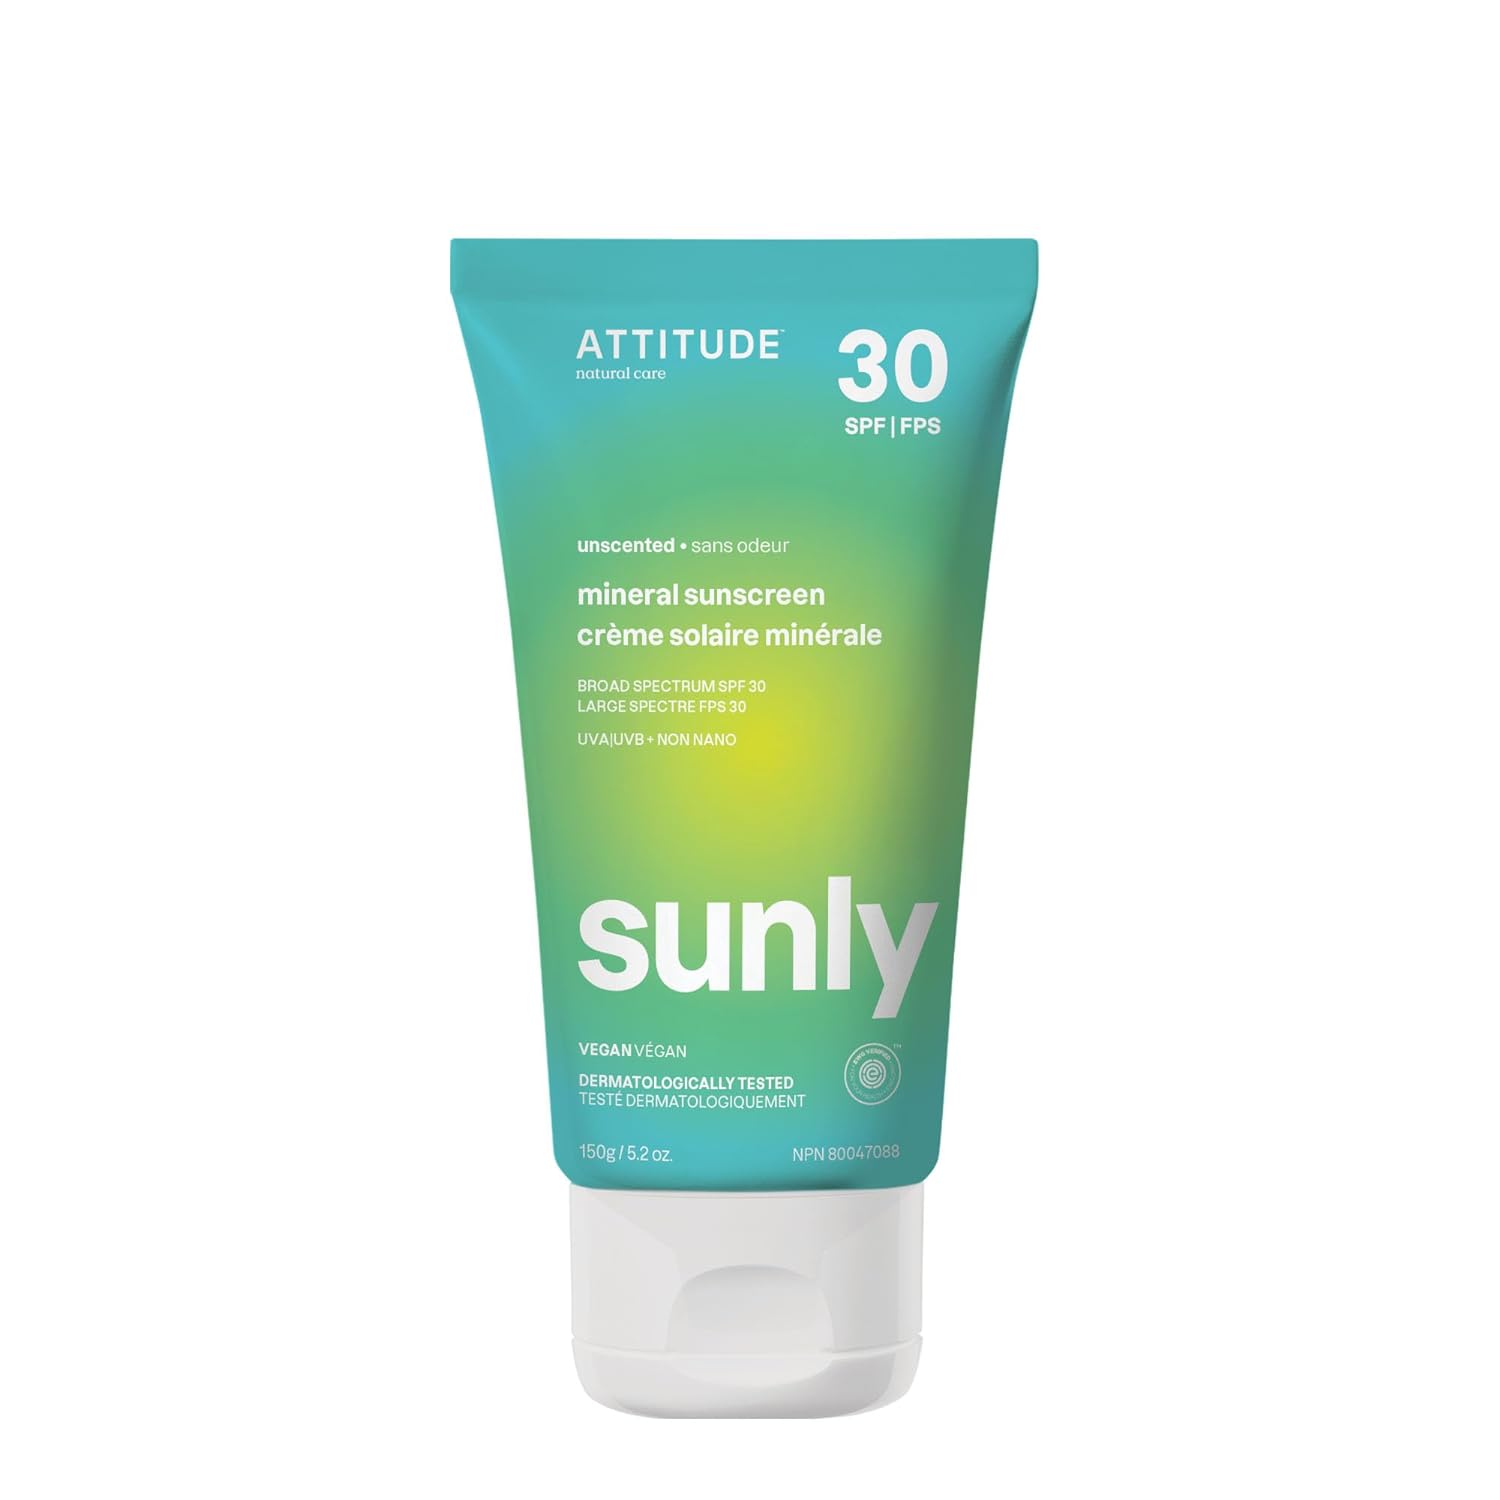 ATTITUDE Mineral Sunscreen with Zinc Oxide, SPF 30, EWG Verified, Broad Spectrum UVA/UVB Protection, Dermatologically Tested, Vegan, Unscented, 5.2 Ounces